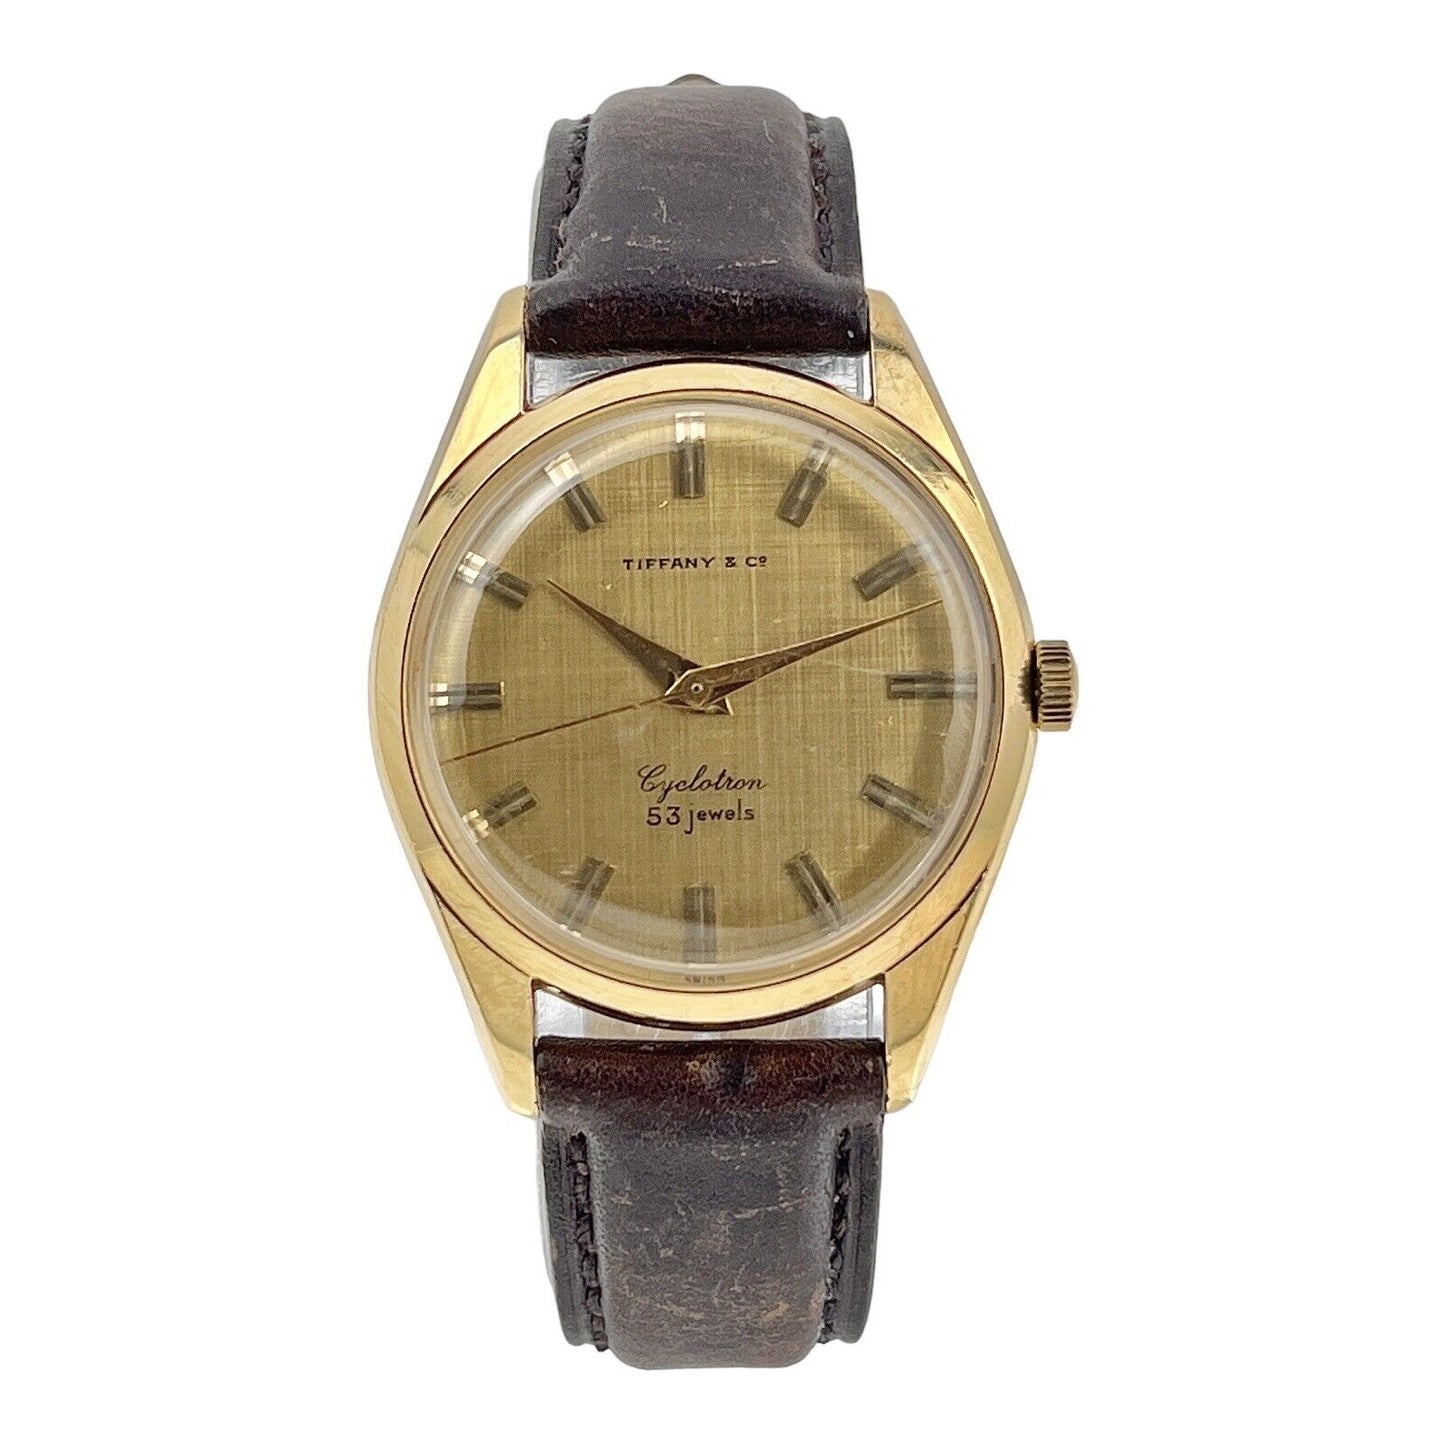 Blancpain Cyclotron For Tiffany & Co 18k Yellow Gold Automatic Watch Vintage